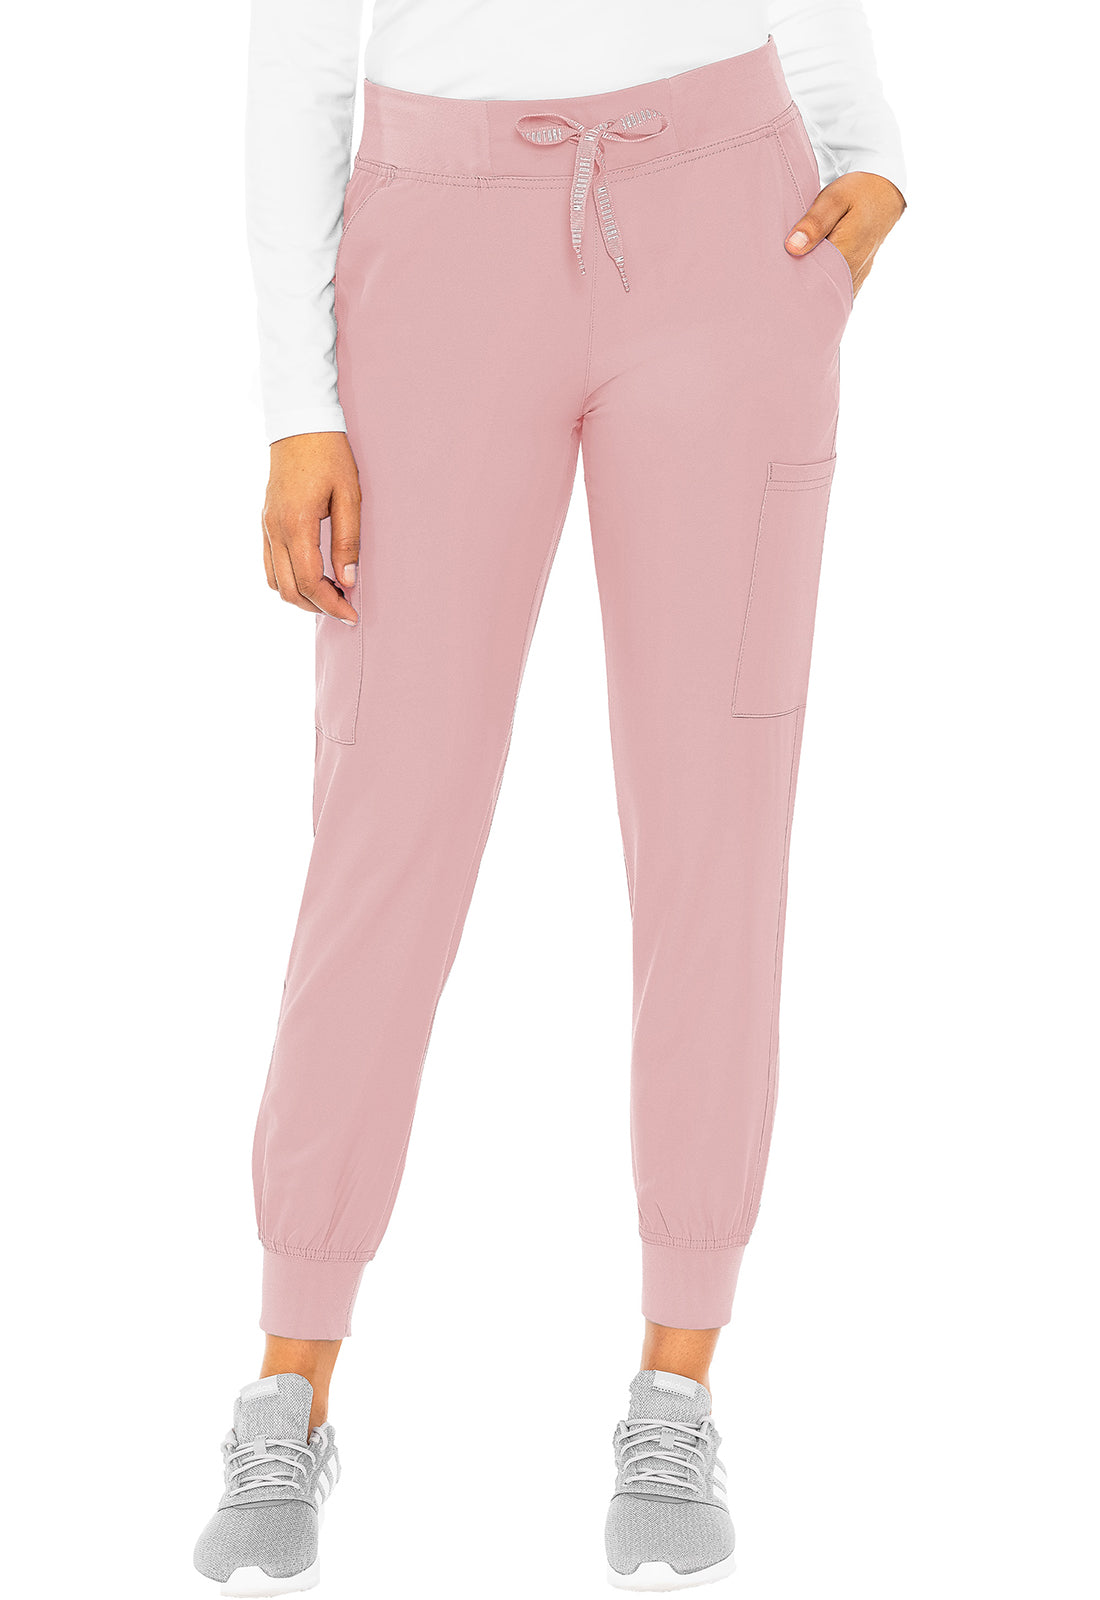 Med Couture Insight Jogger Pants